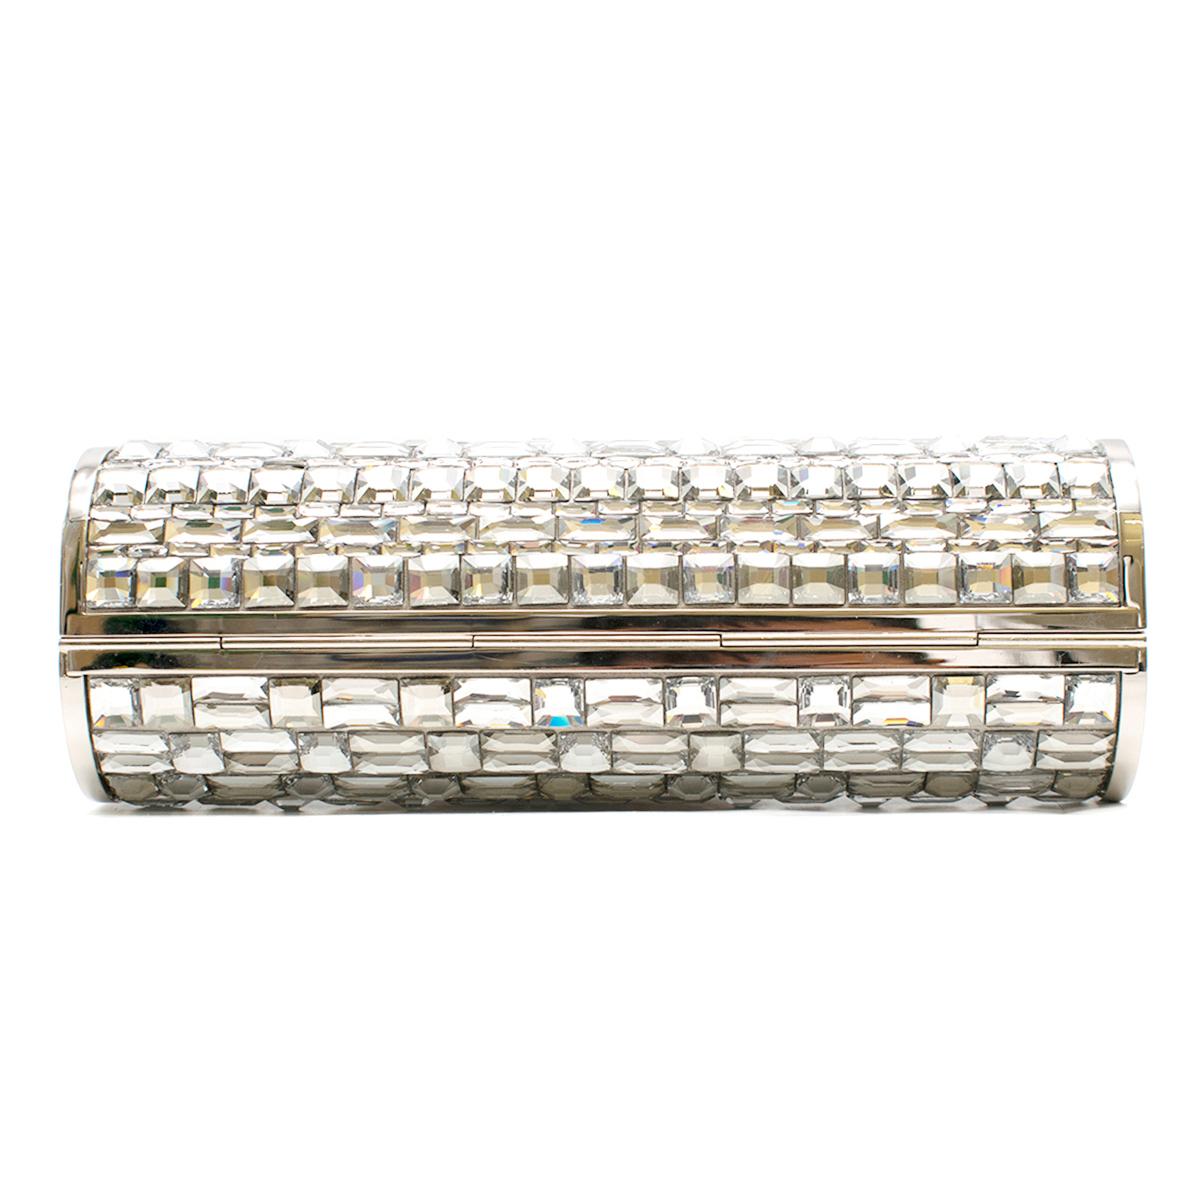 Jimmy Choo Crystal Embellished Tube Clutch Bag

-Crystal detailed clutch
-Silver hardware 
-Nude interior lining 
-Push button opening 

Please note, these items are pre-owned and may show some signs of storage, even when unworn and unused. This is